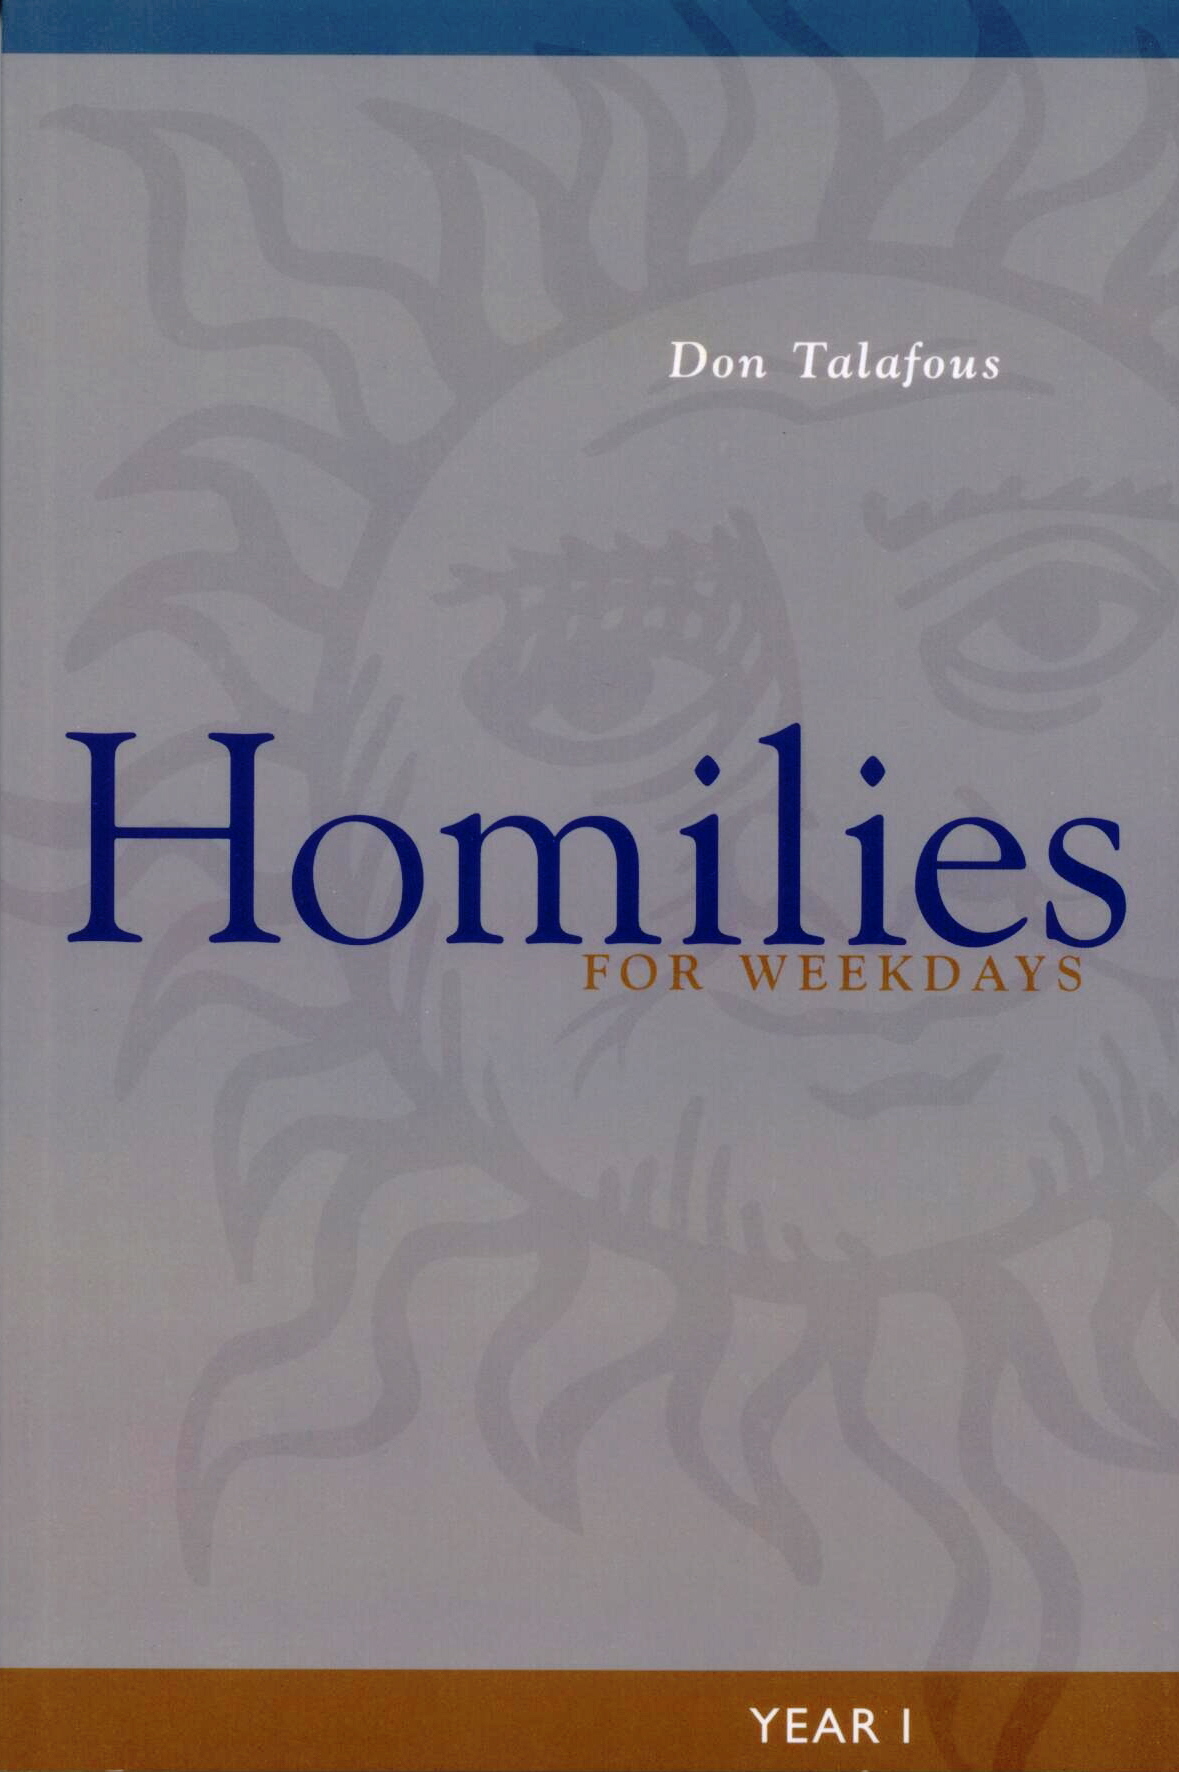 Homilies for Weekdays Year I by Don Talafous